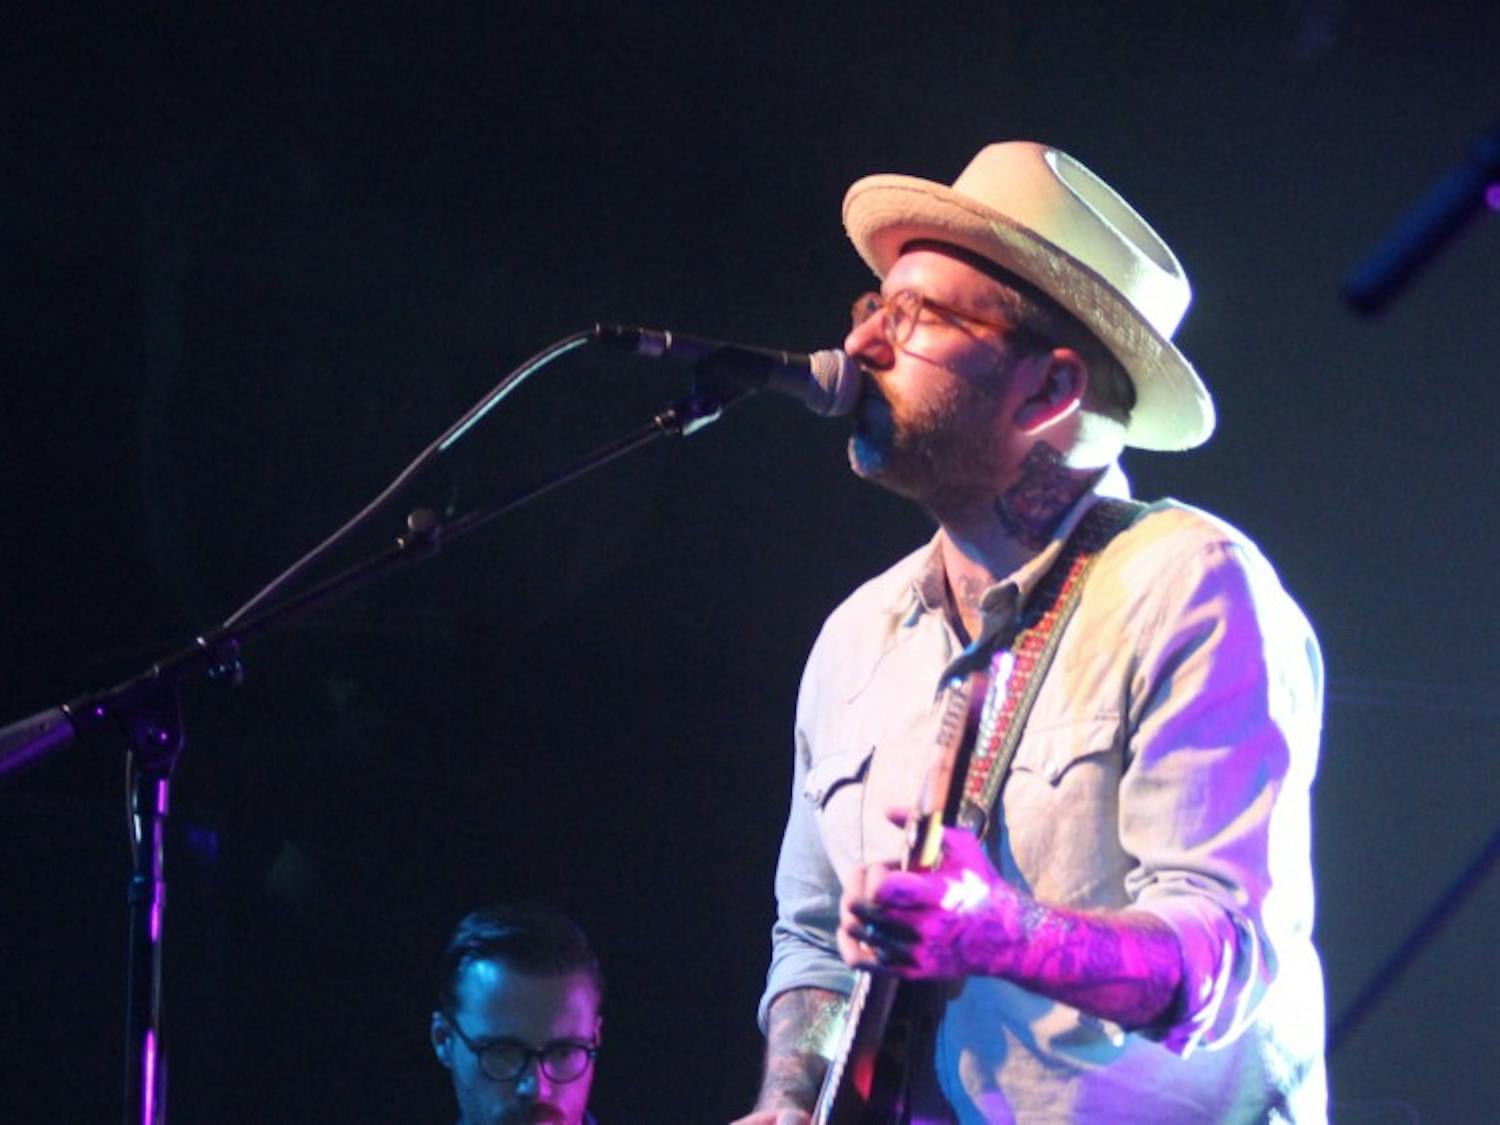 City and Colour performed 'Thirst' off their new album, "The Hurry and The Harm." They played at The Marquee in Tempe, along with Australian band, The Paper Kites. (Photo by Kelly Kleber)